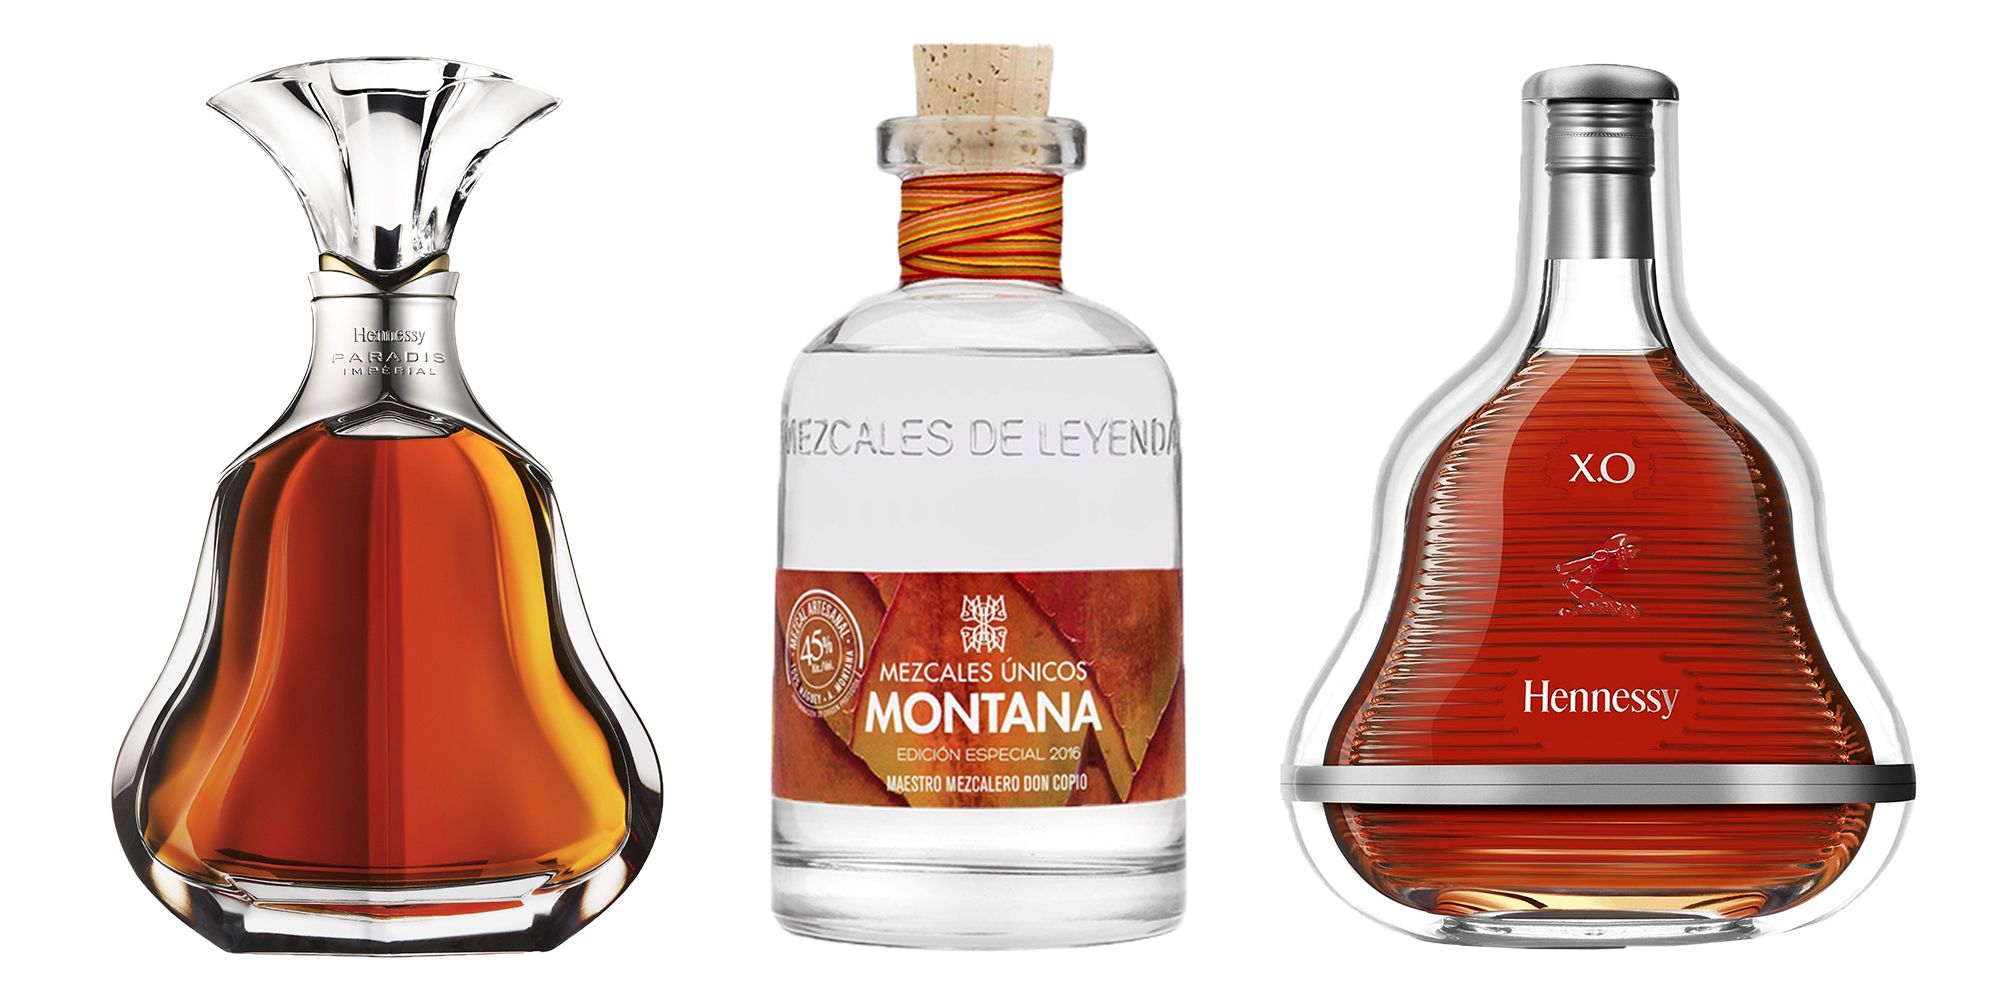 Finest cognac: Hennessy XO, Hennessy Paradis and other cognac bottles